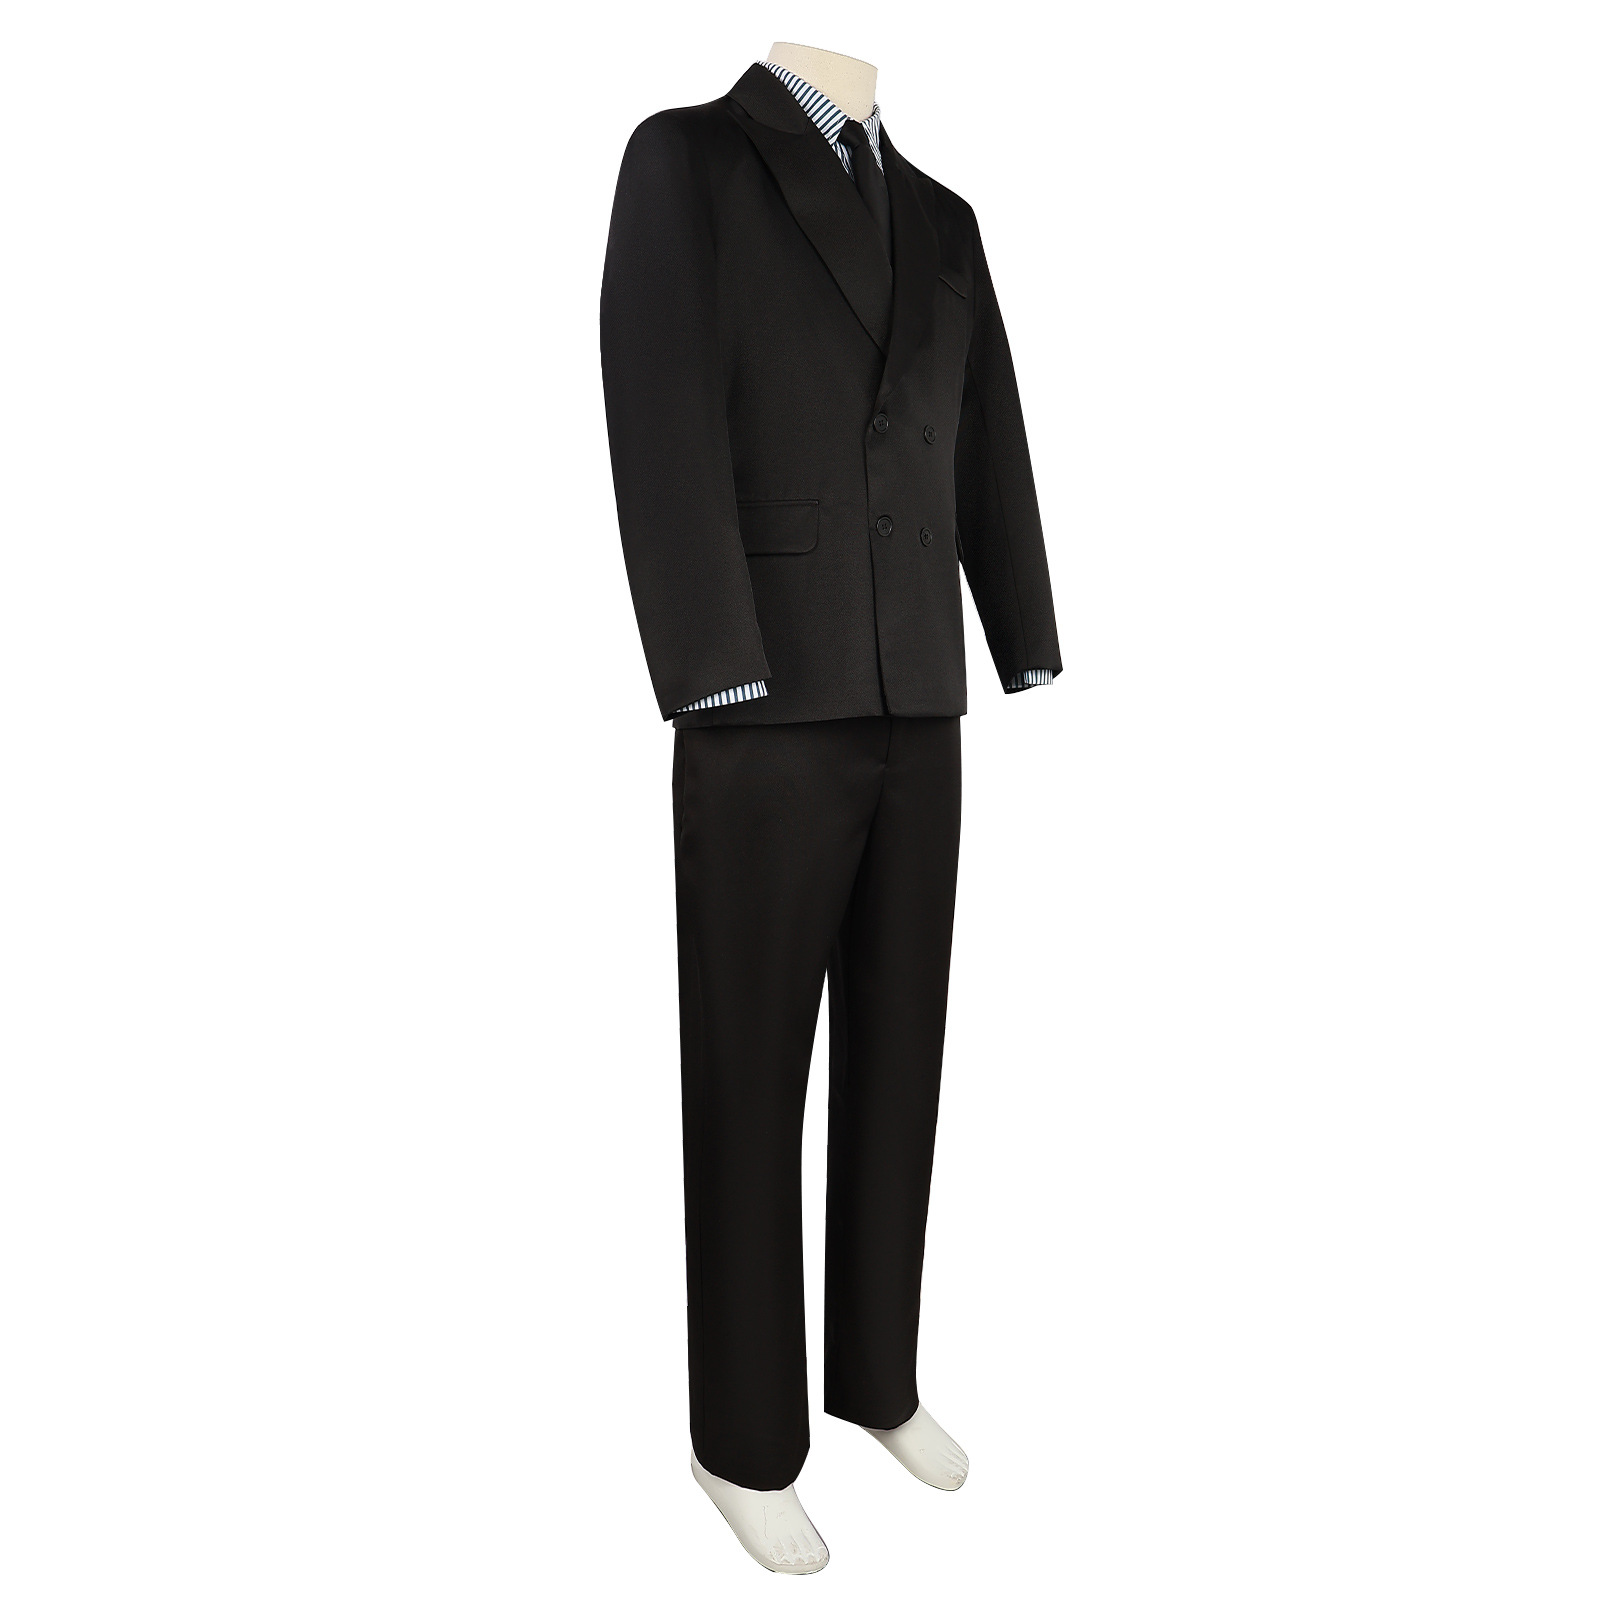 One Piece Sanji cos clothing ONEPIECE Sanji black suit live-action film and television cosplay costume